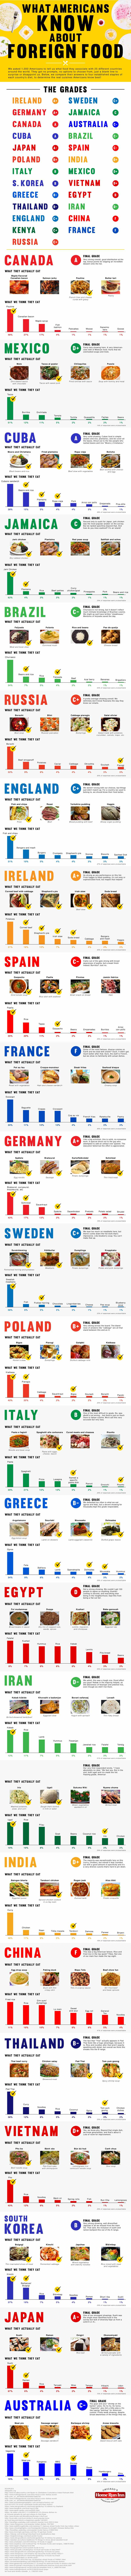 Americans Perception Of Popular Foreign Foods